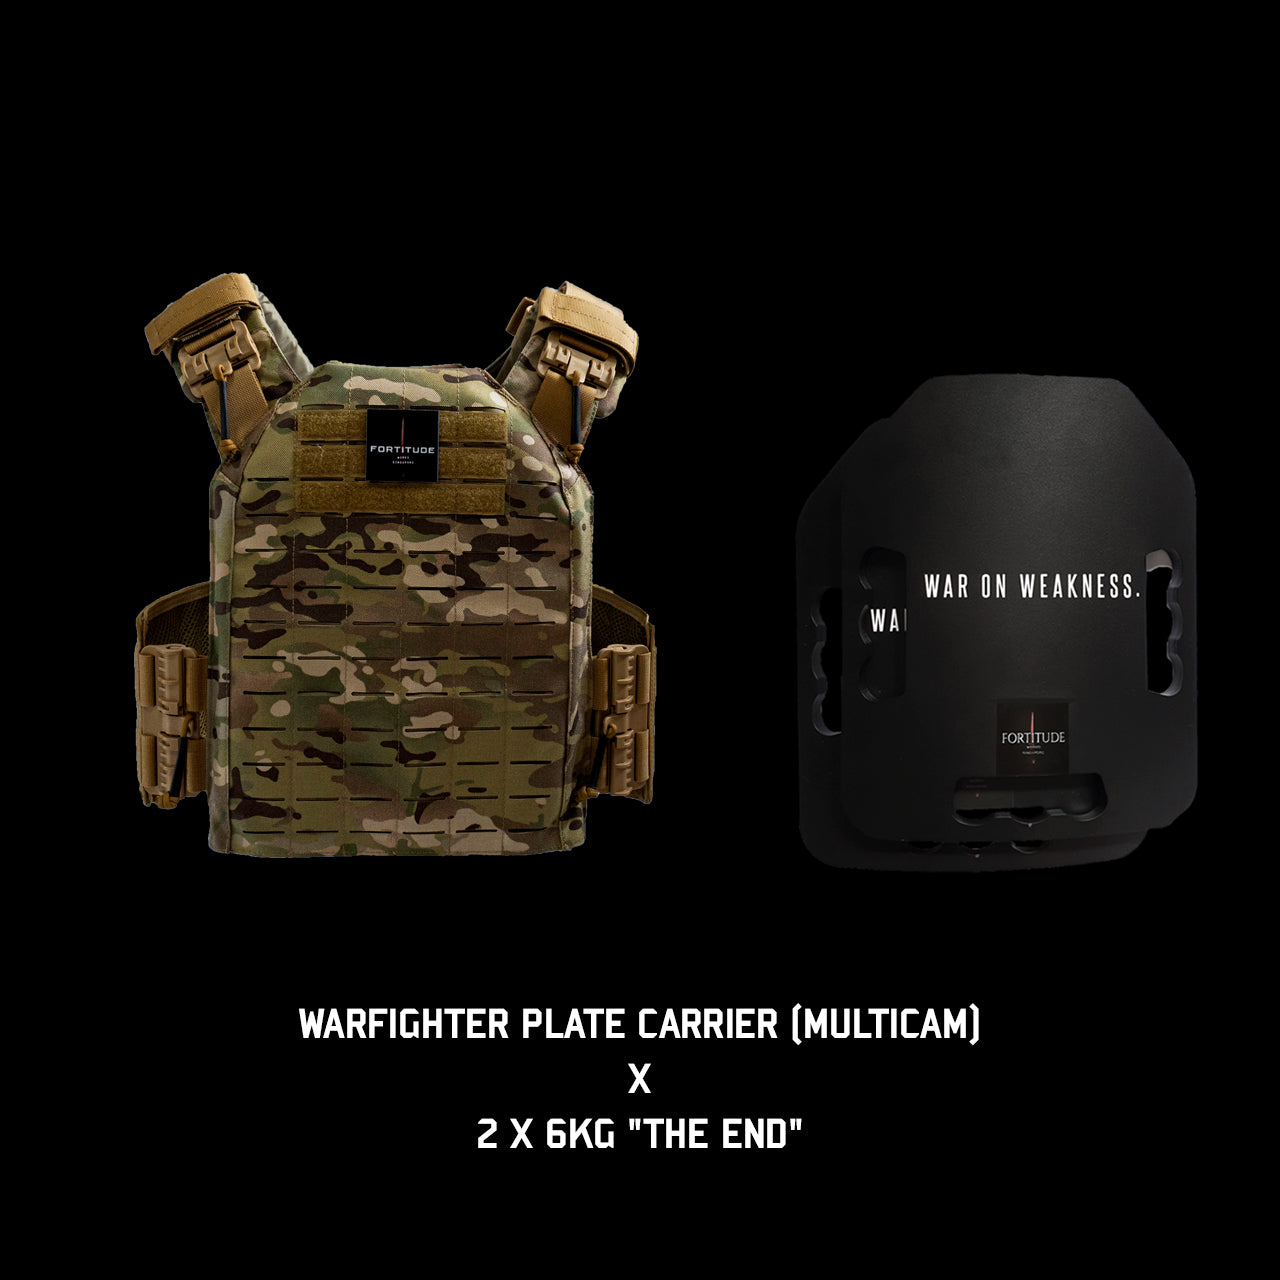 WARFIGHTER Plate Carrier - FORTITUDE WORKS SINGAPORE